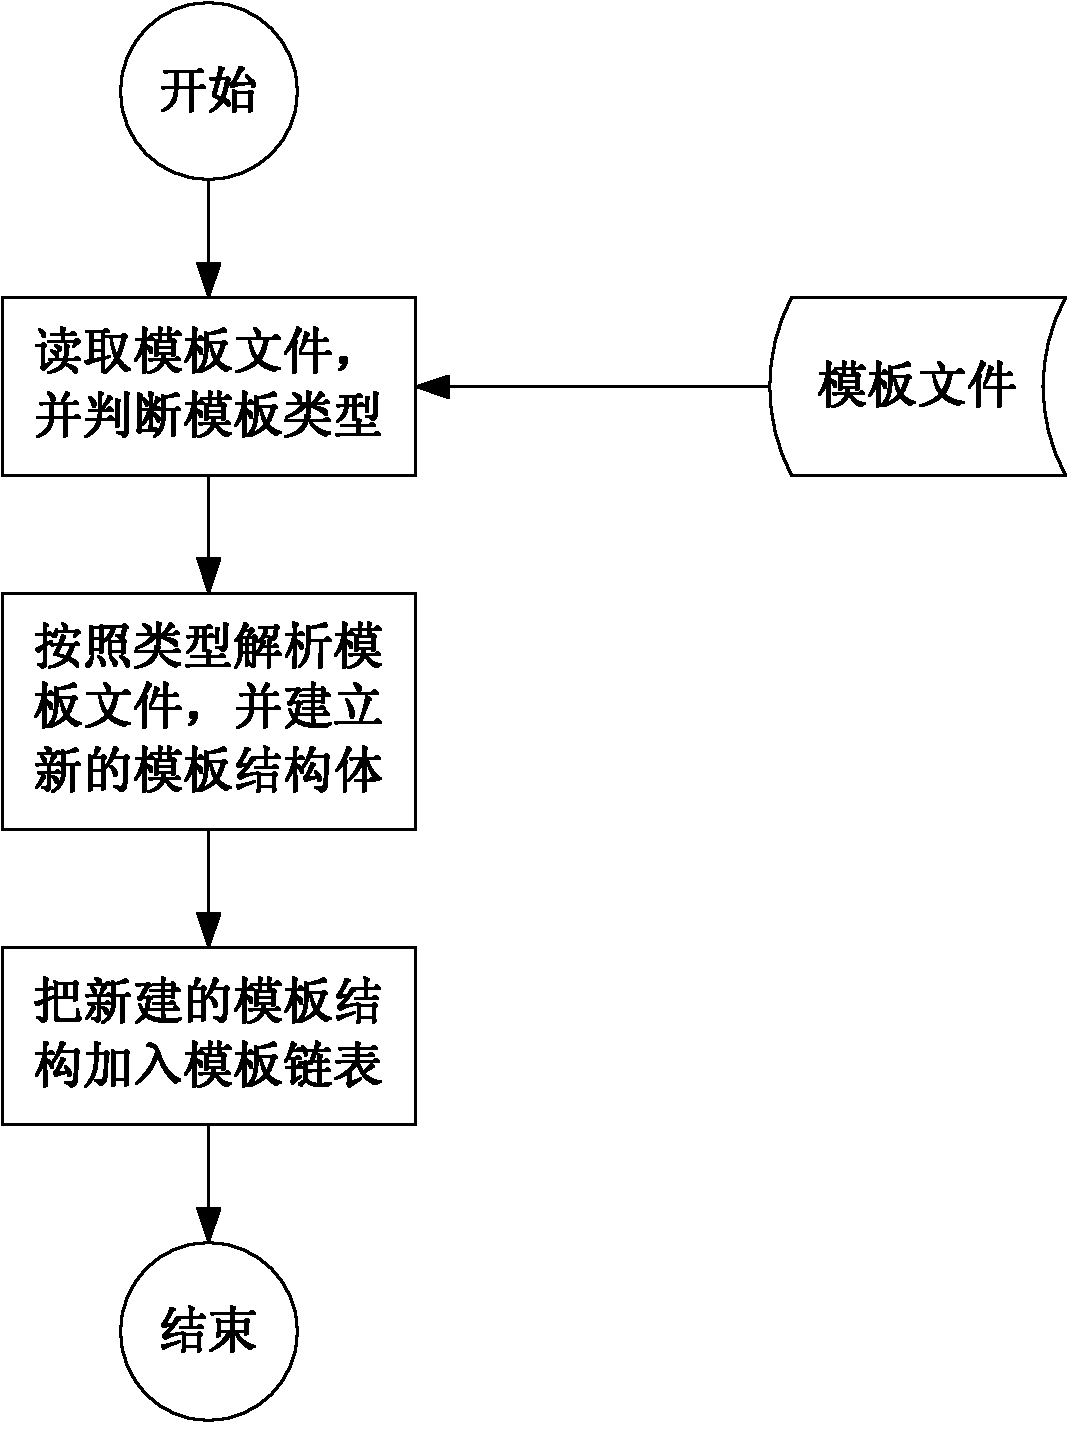 Method and system for reducing WEB type application contents